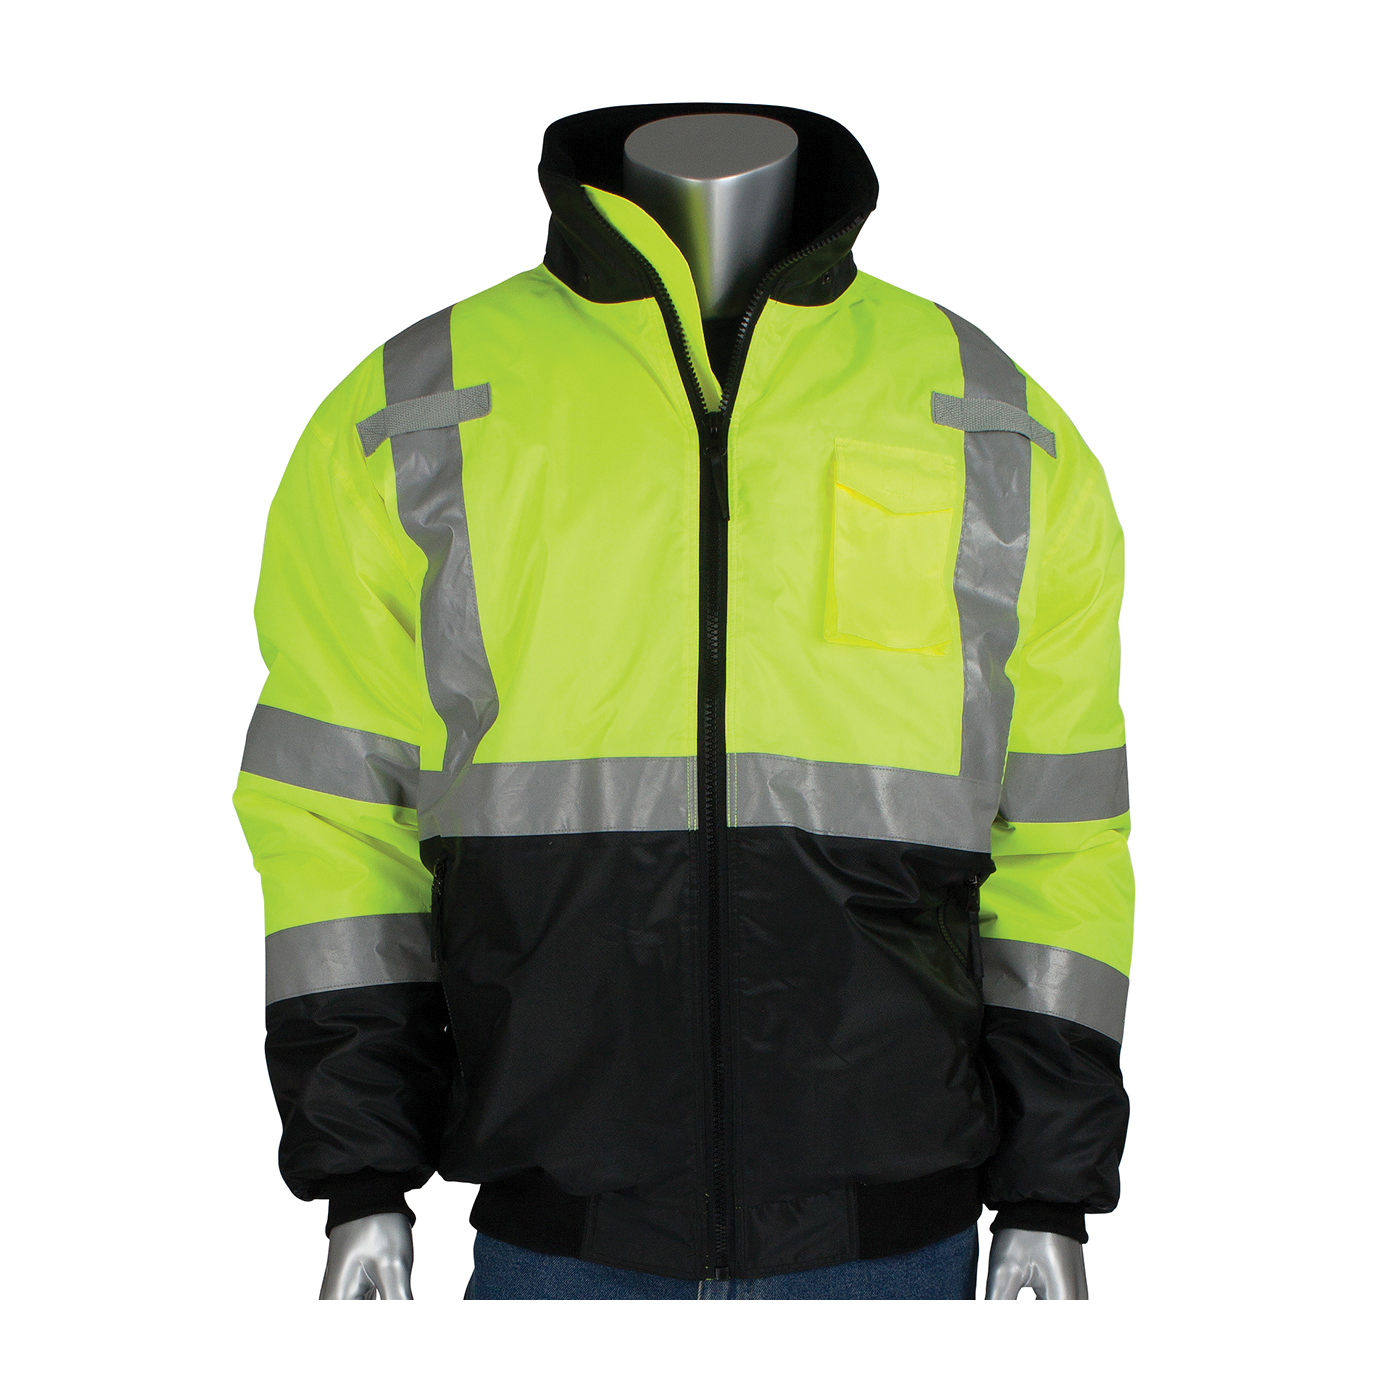 PIP® 333-1740-LY/L Bomber Jacket, Black/Hi-Viz Lime Yellow, Polyester, 56 in Chest, Resists: Water, ANSI Type R Class 3